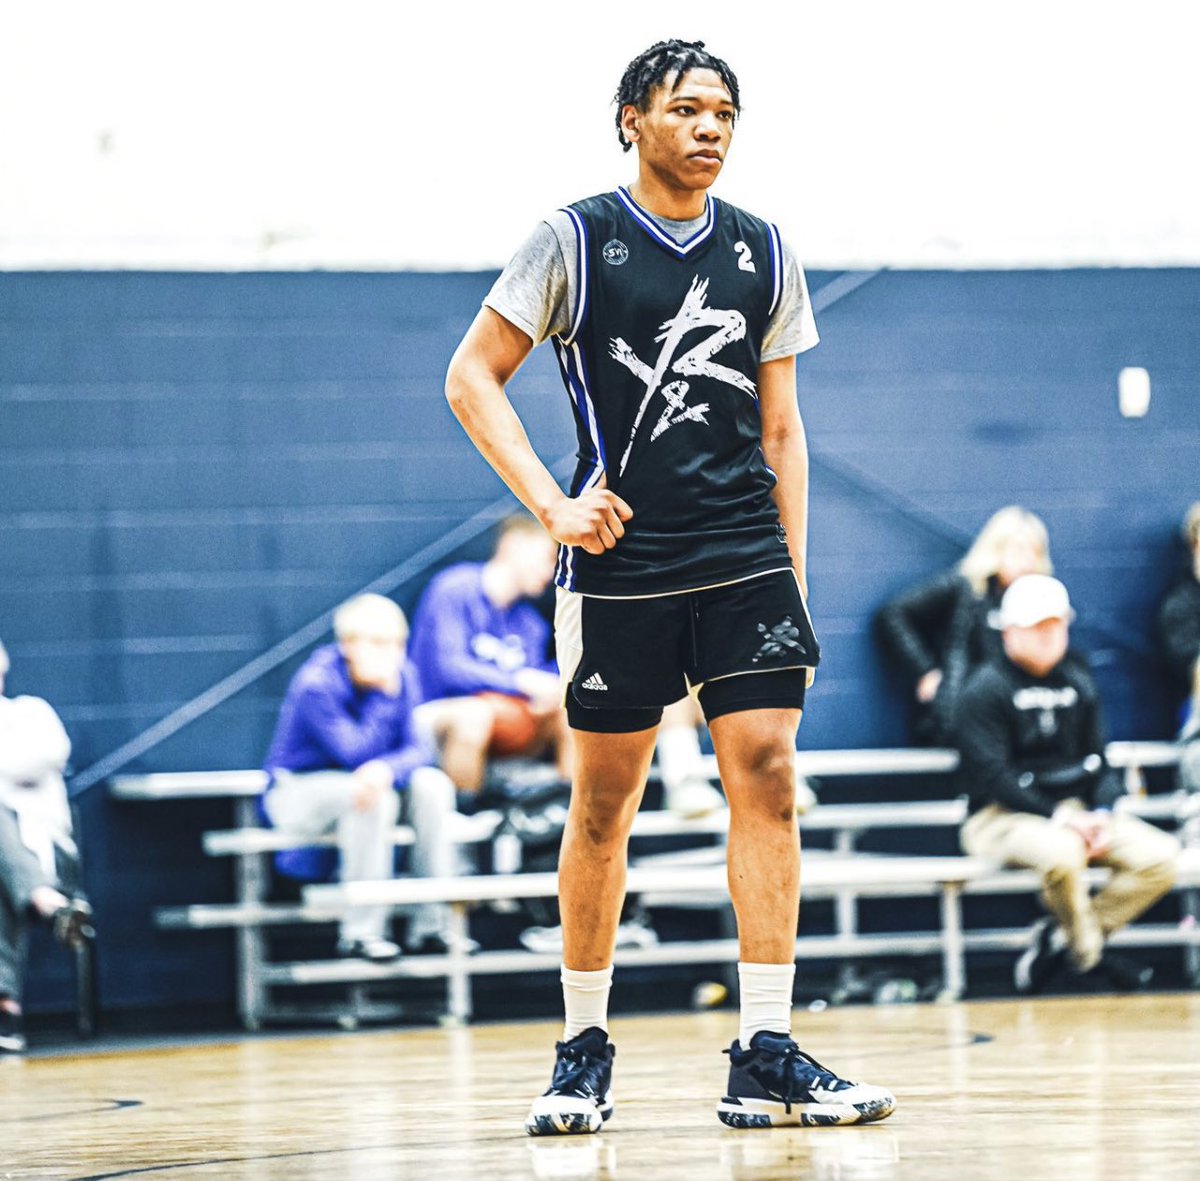 Stoney Brock Freshman Kaiden Space @KaidenSpace has confirmed he is entering the transfer portal with 3 years of eligibility remaining @YnRbball @mrJaybrim @RL_Hoops @RL_HoopsIL @247HSHoops @ThePortalReport